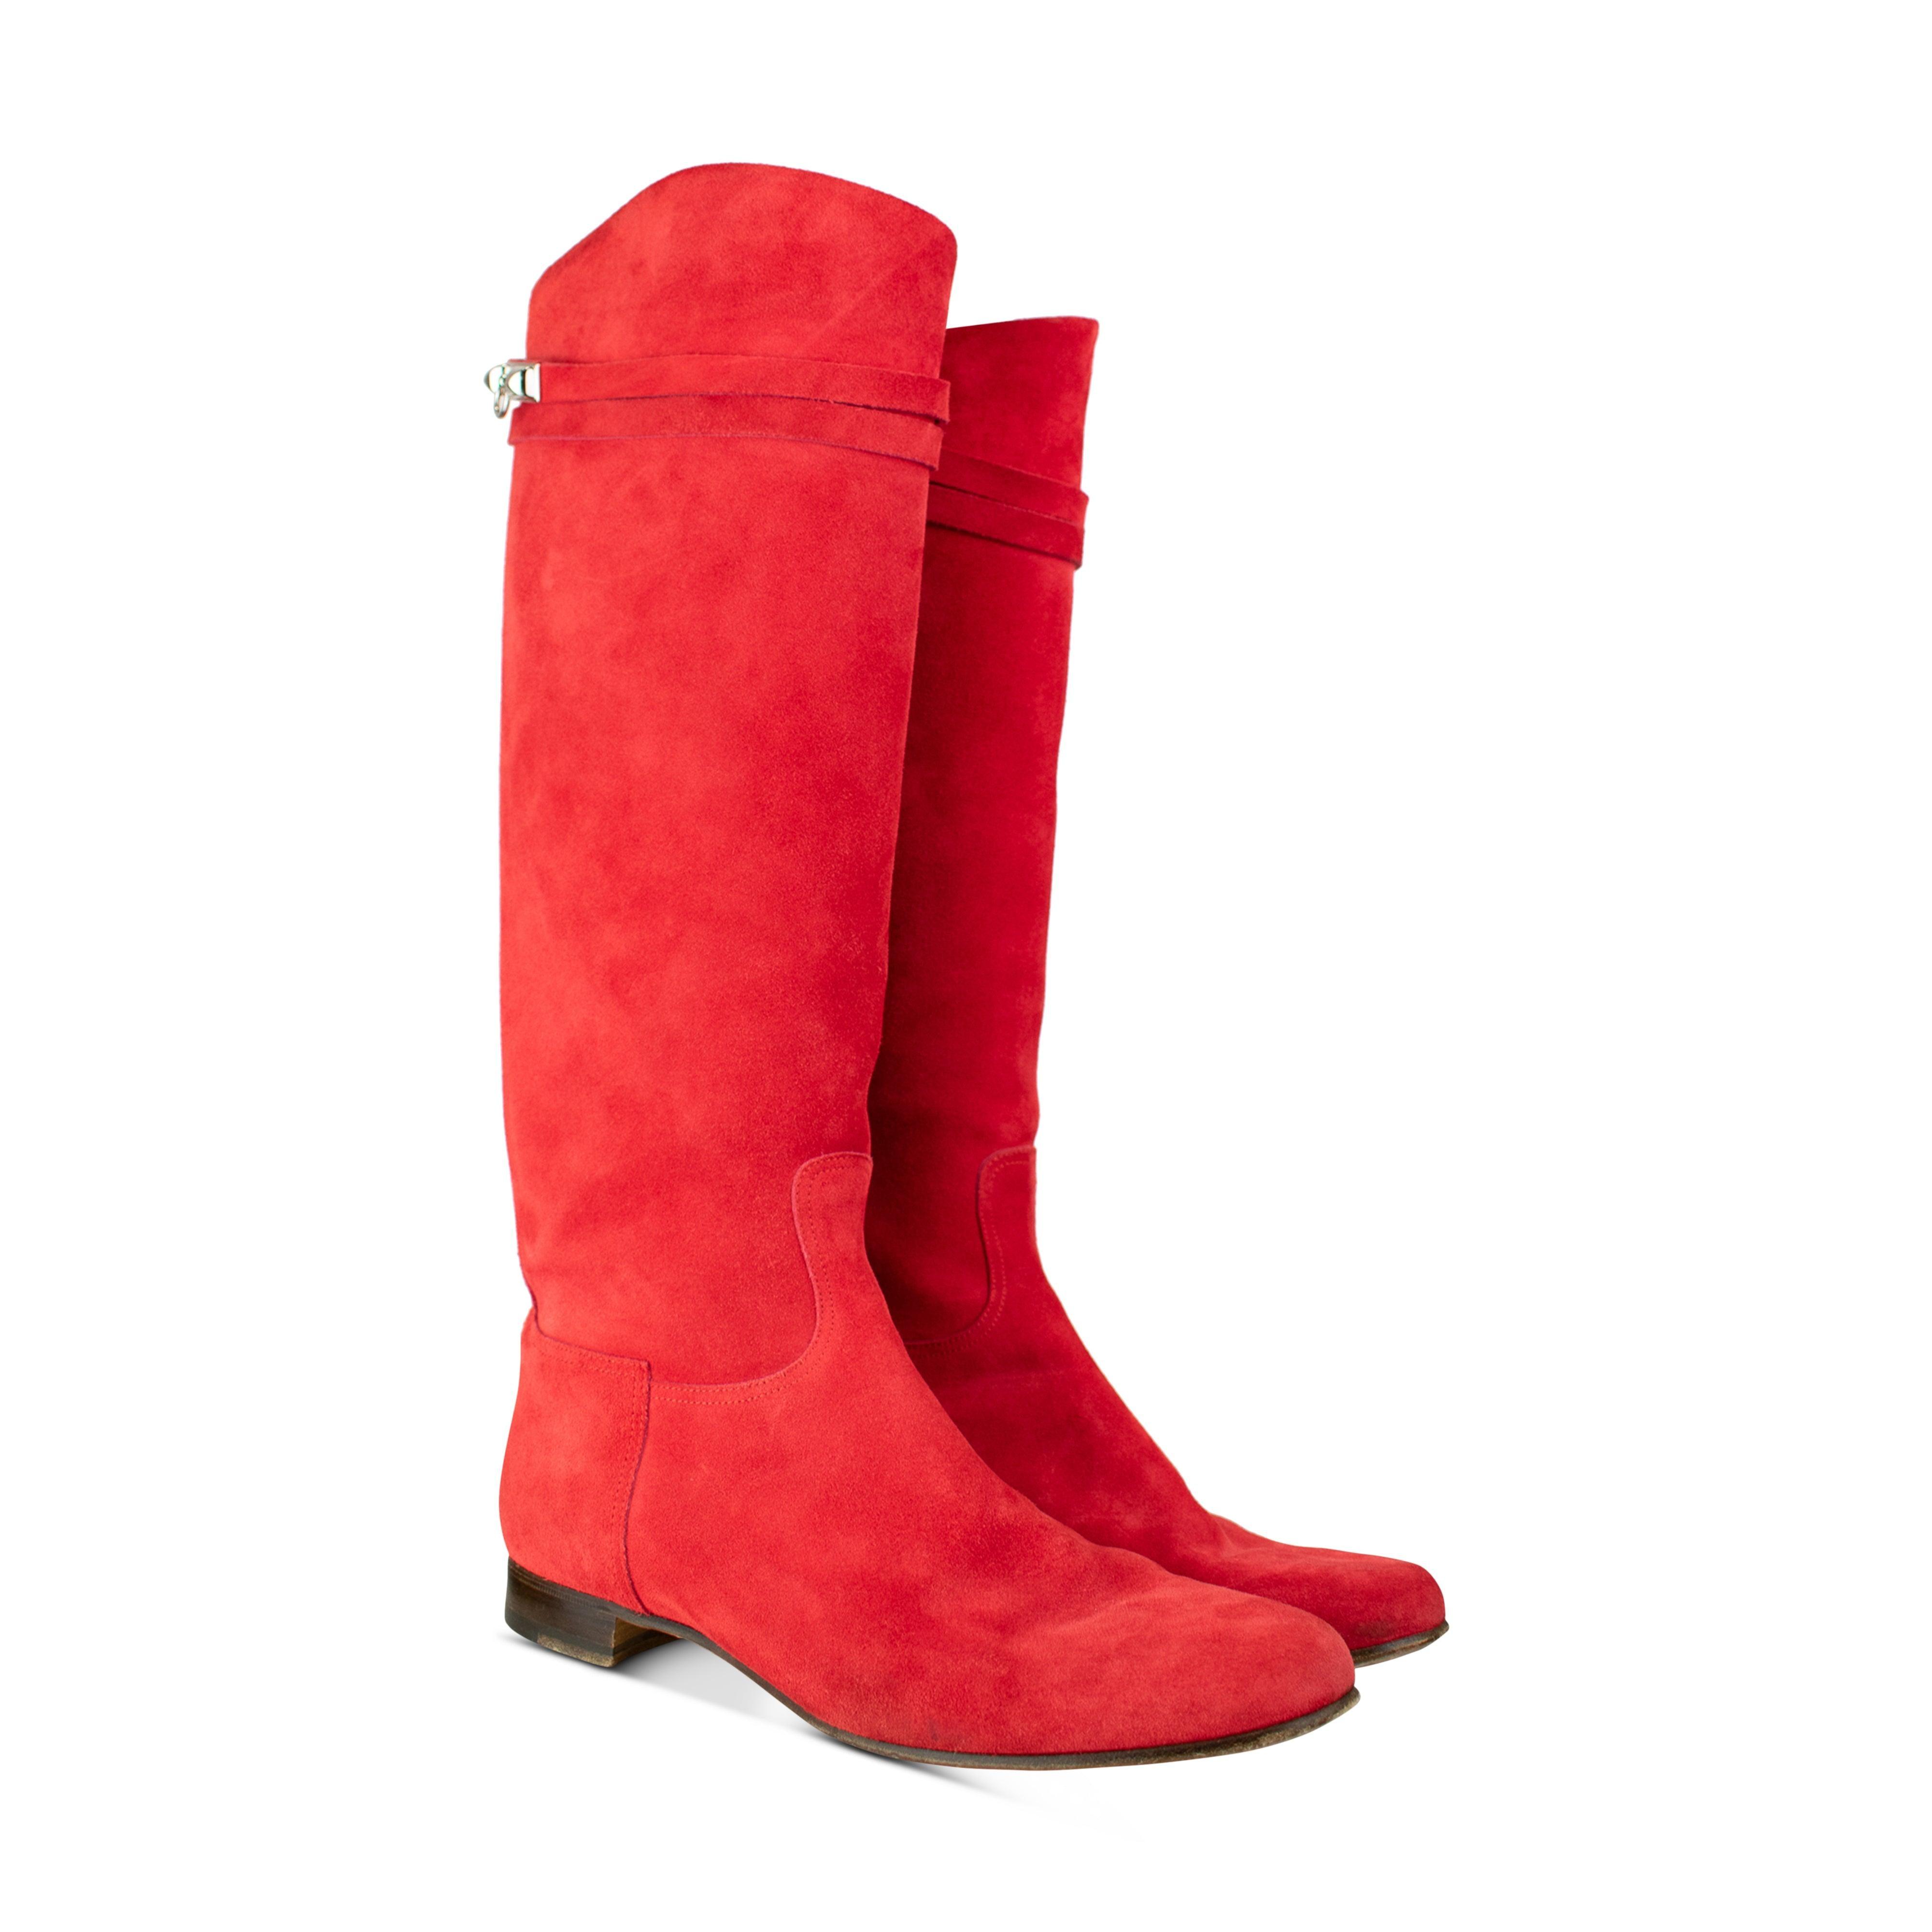 Hermes Boots - Women's 38 - Fashionably Yours